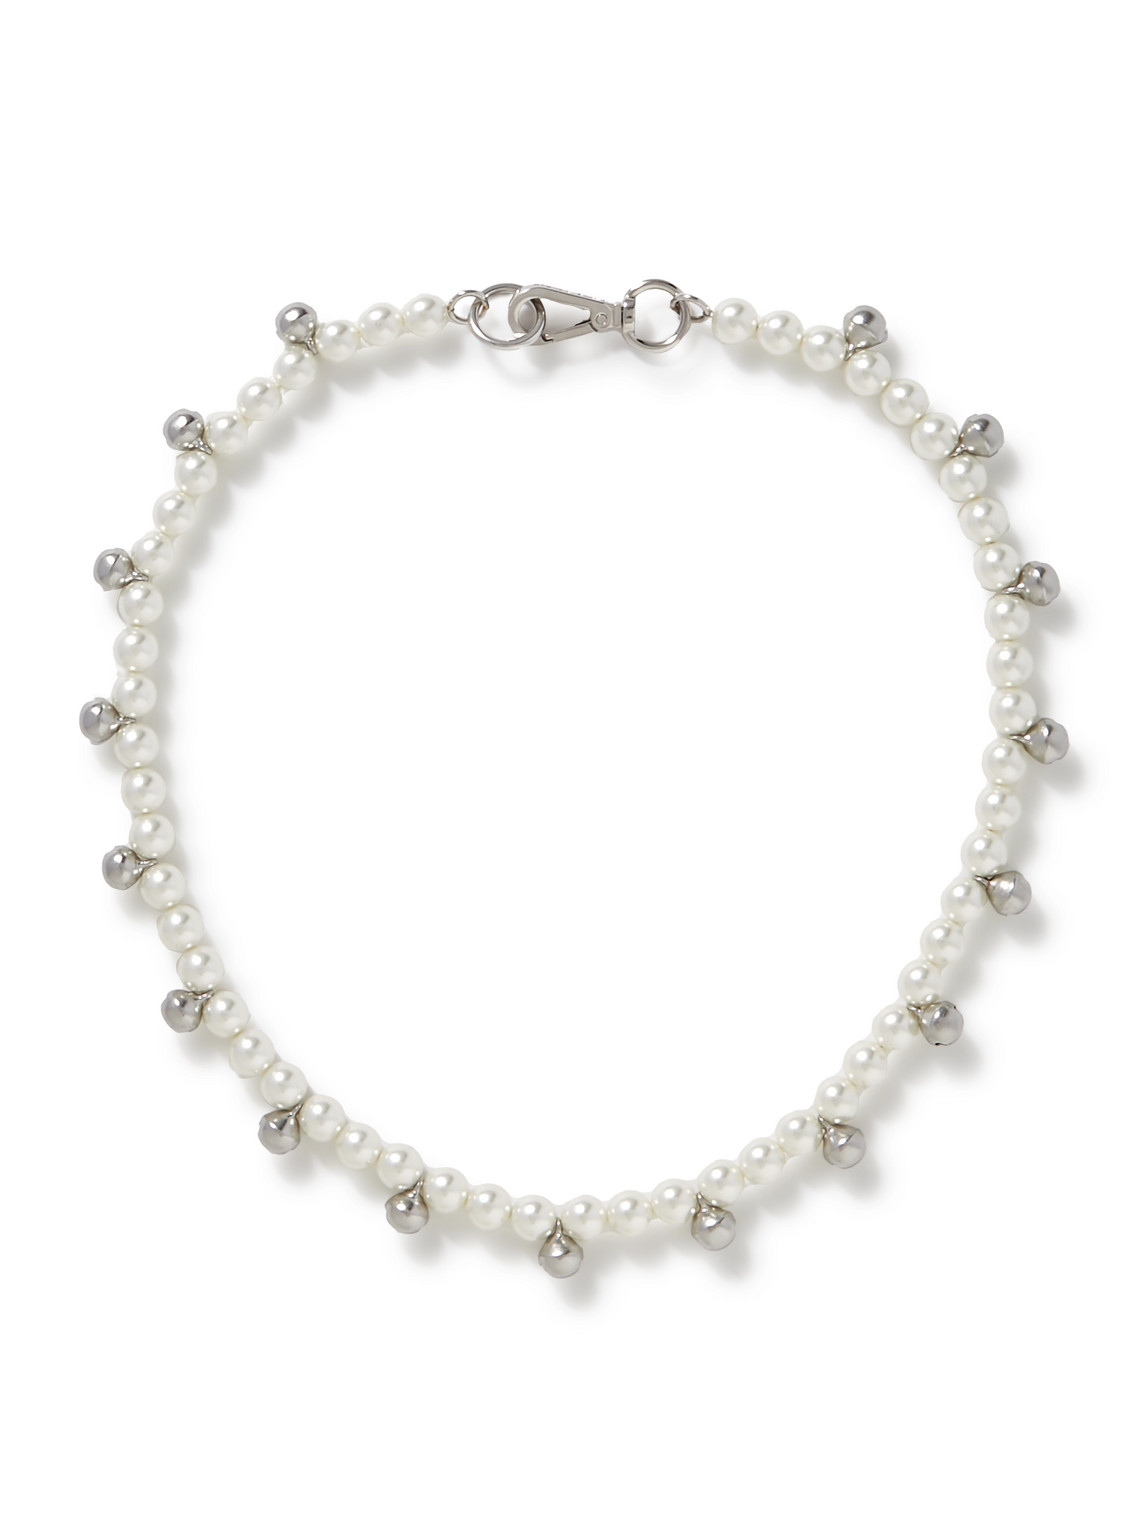 SIMONE ROCHA BELL SILVER-TONE AND FAUX PEARL NECKLACE